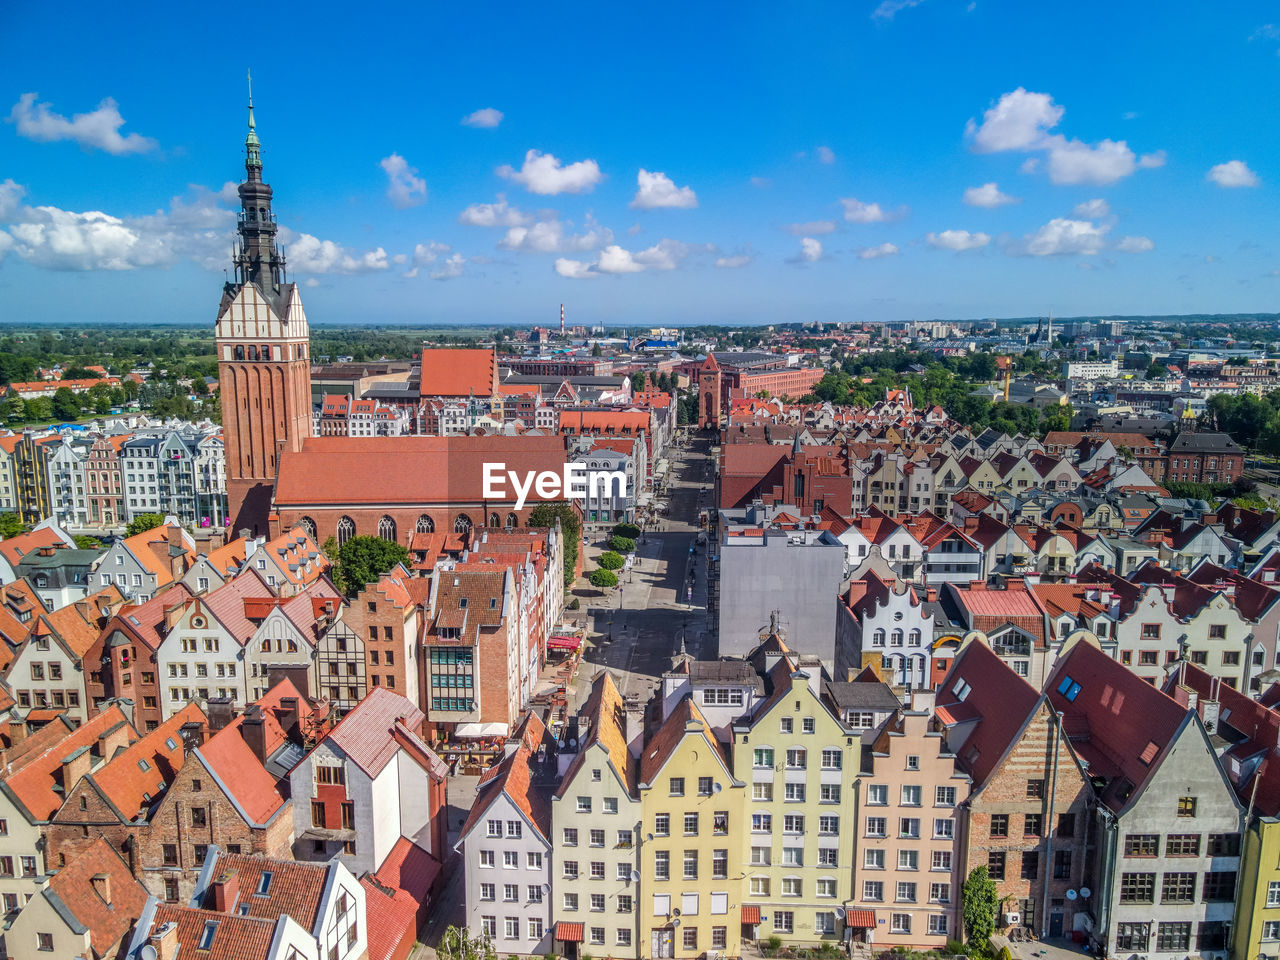 Aerial view of the old town in elblag, poland